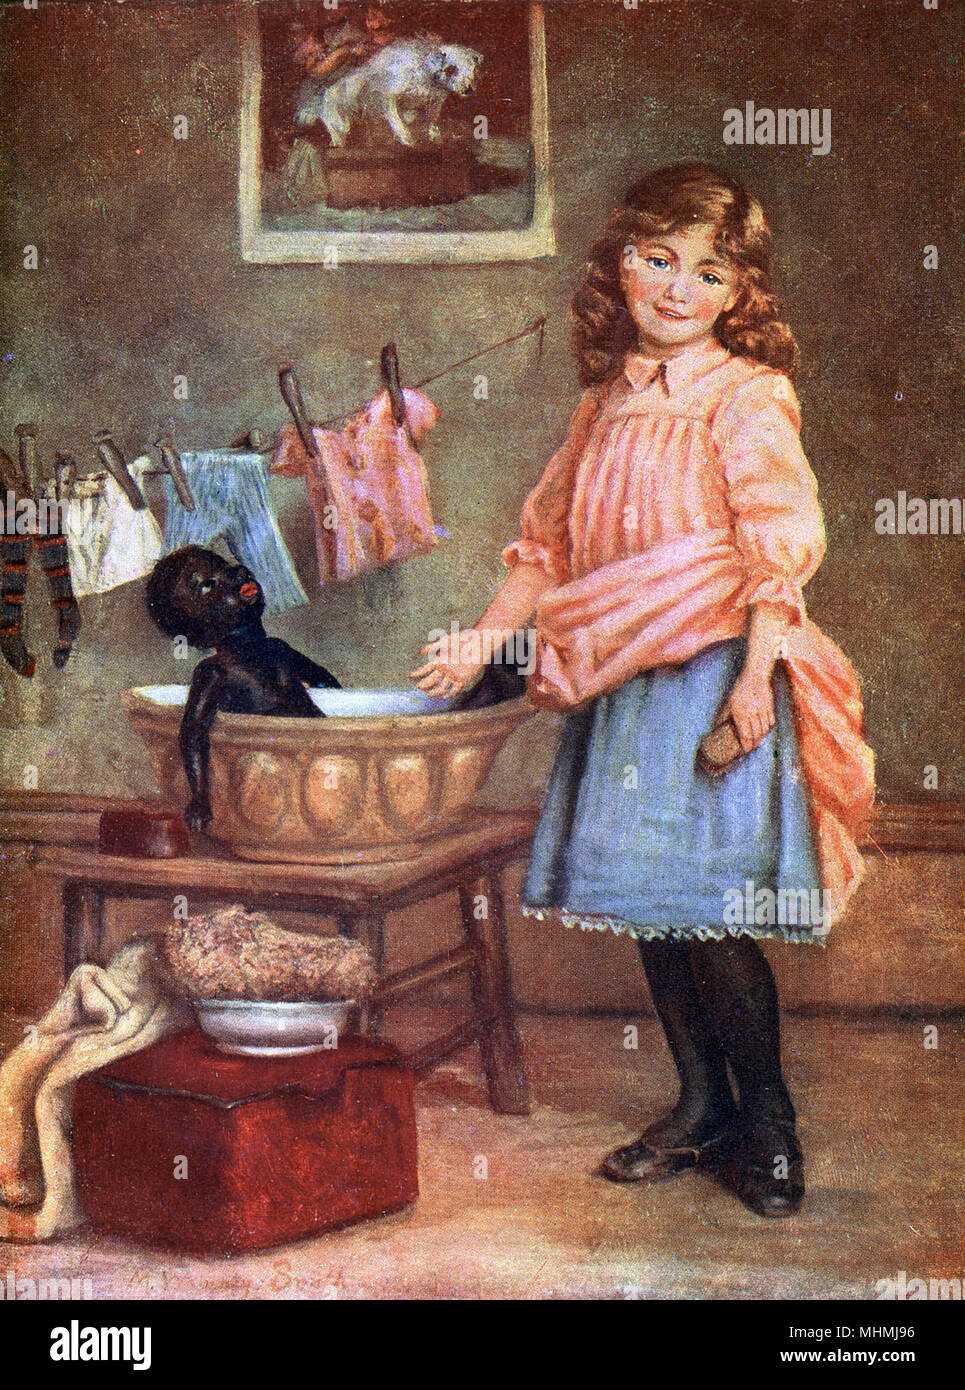 'What shall I do with him ?' a girl and her golliwog       Date: early 20th century Stock Photo